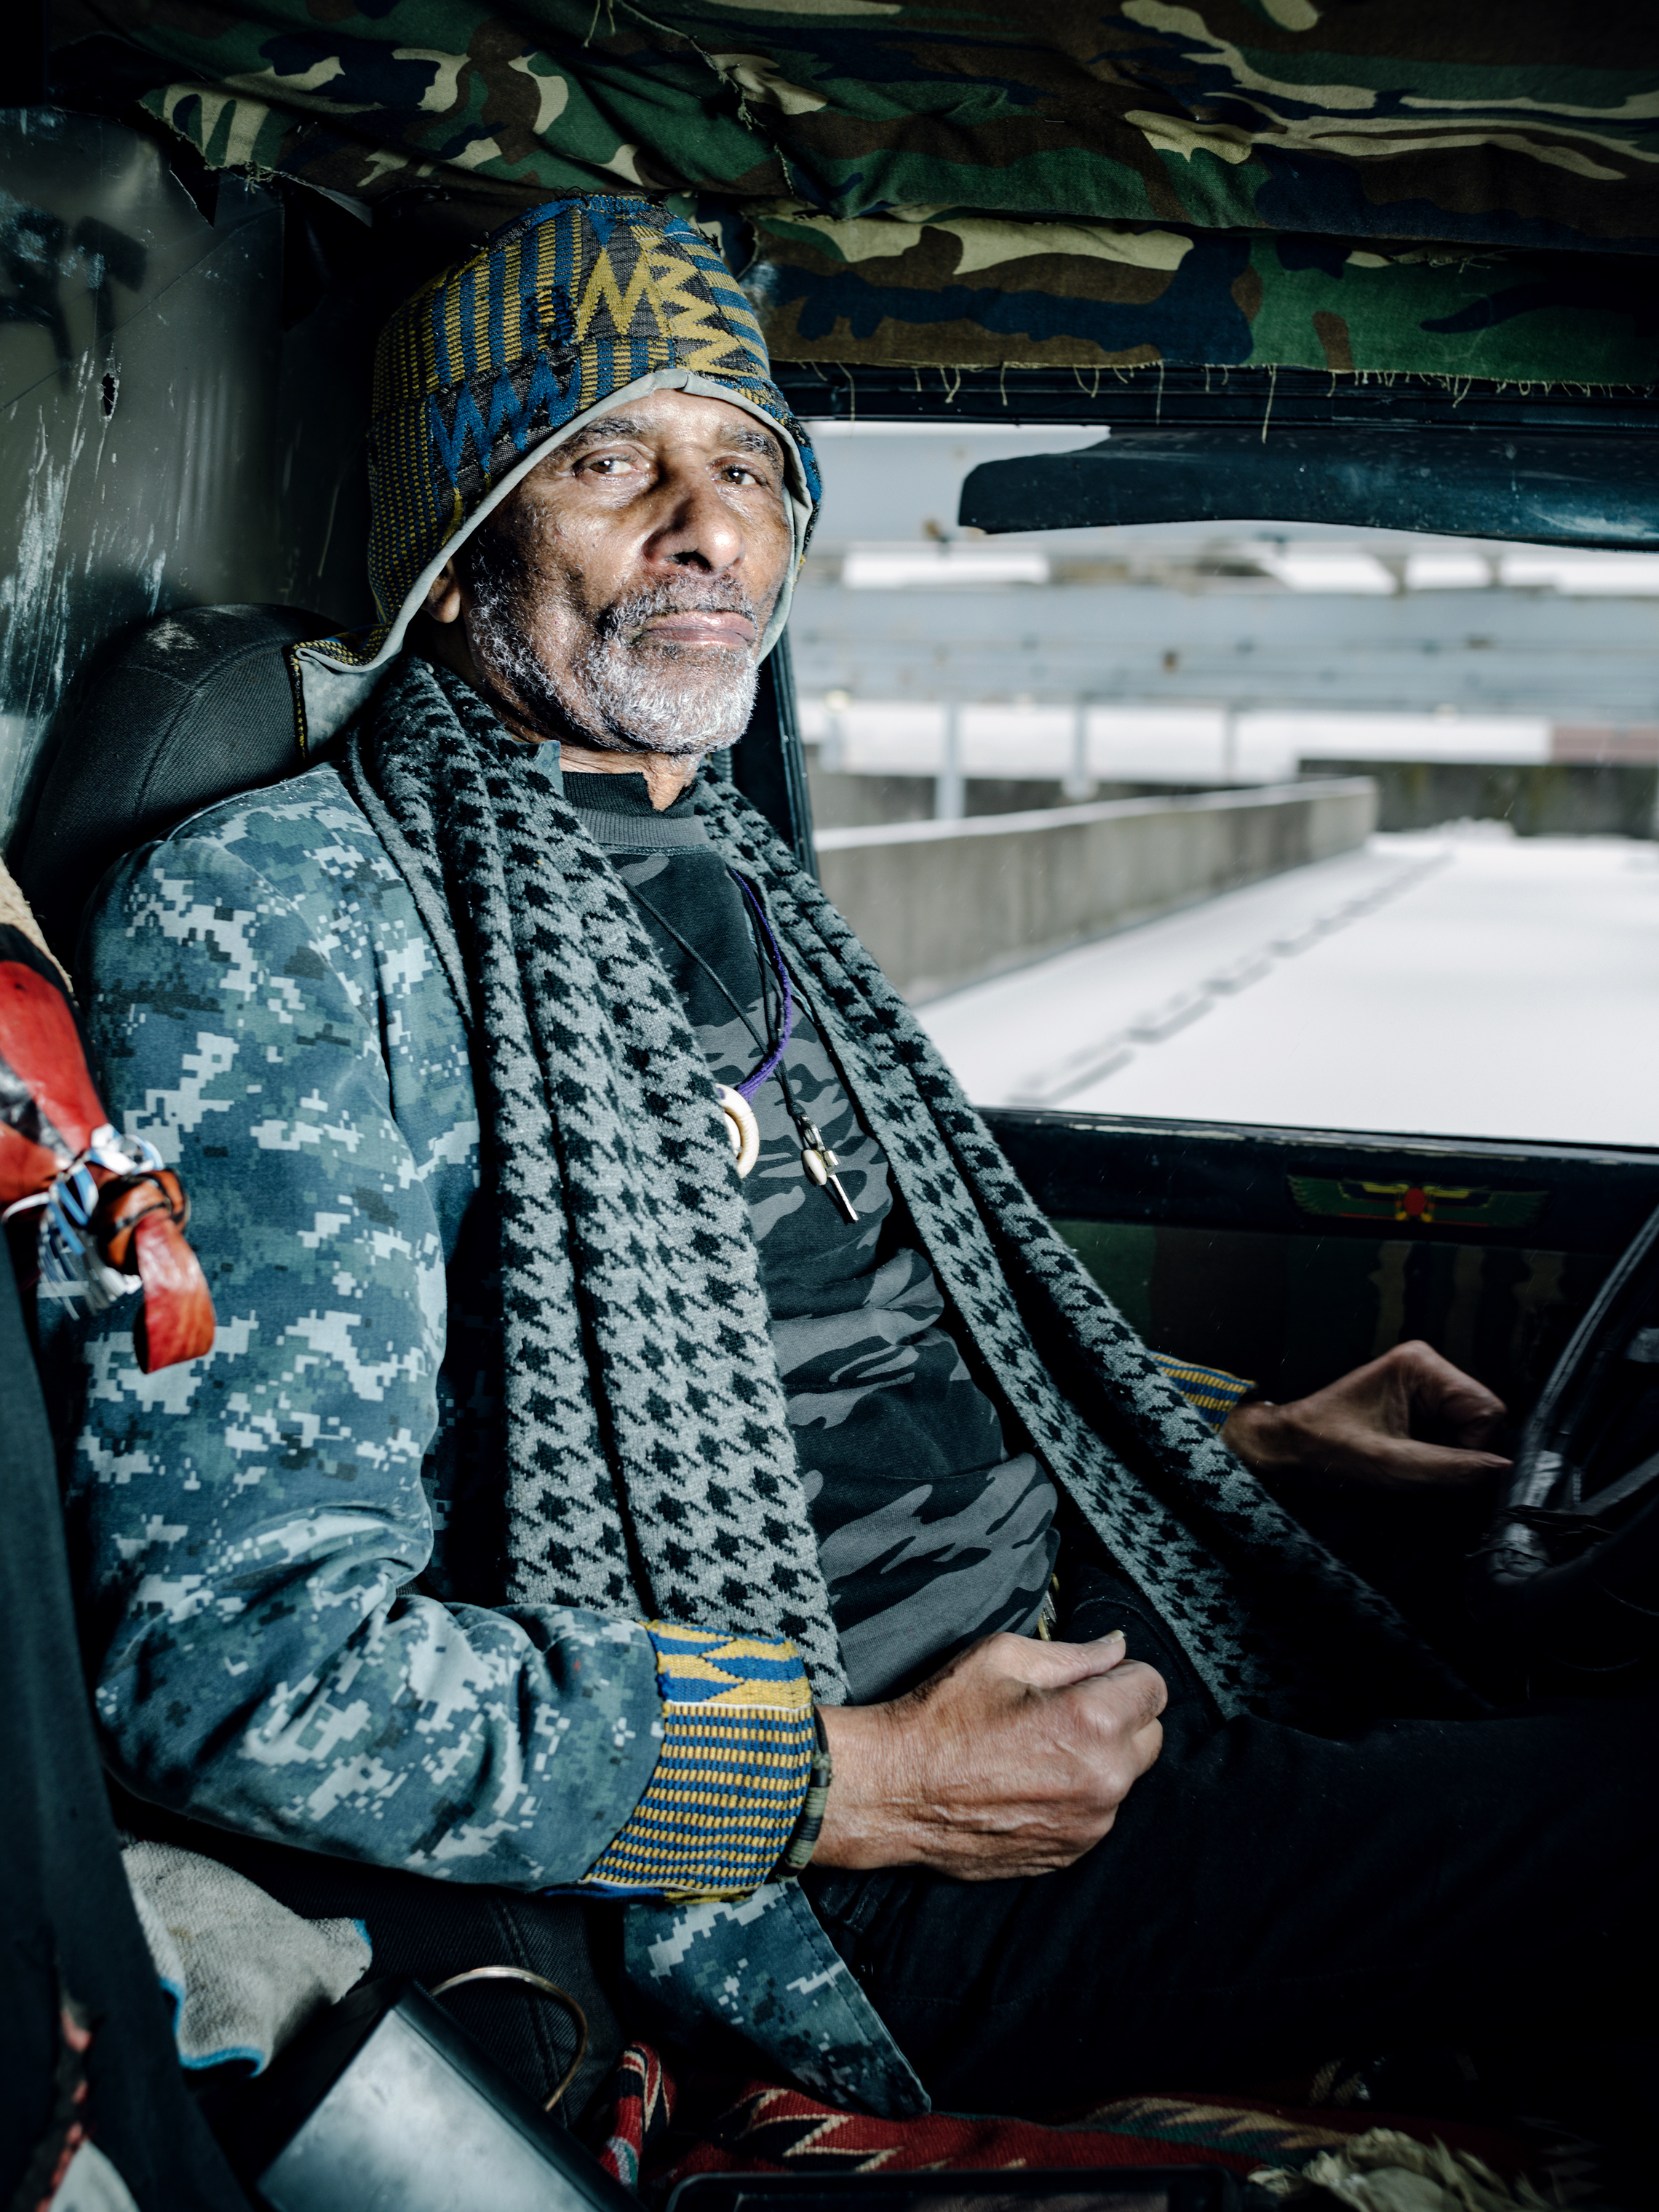 William "Tony" Maynard in Co-op City, Bronx, N.Y., on Feb. 20, sitting in the beloved Jeep that he has called home during road-trips nationwide. (Wayne Lawrence for TIME)